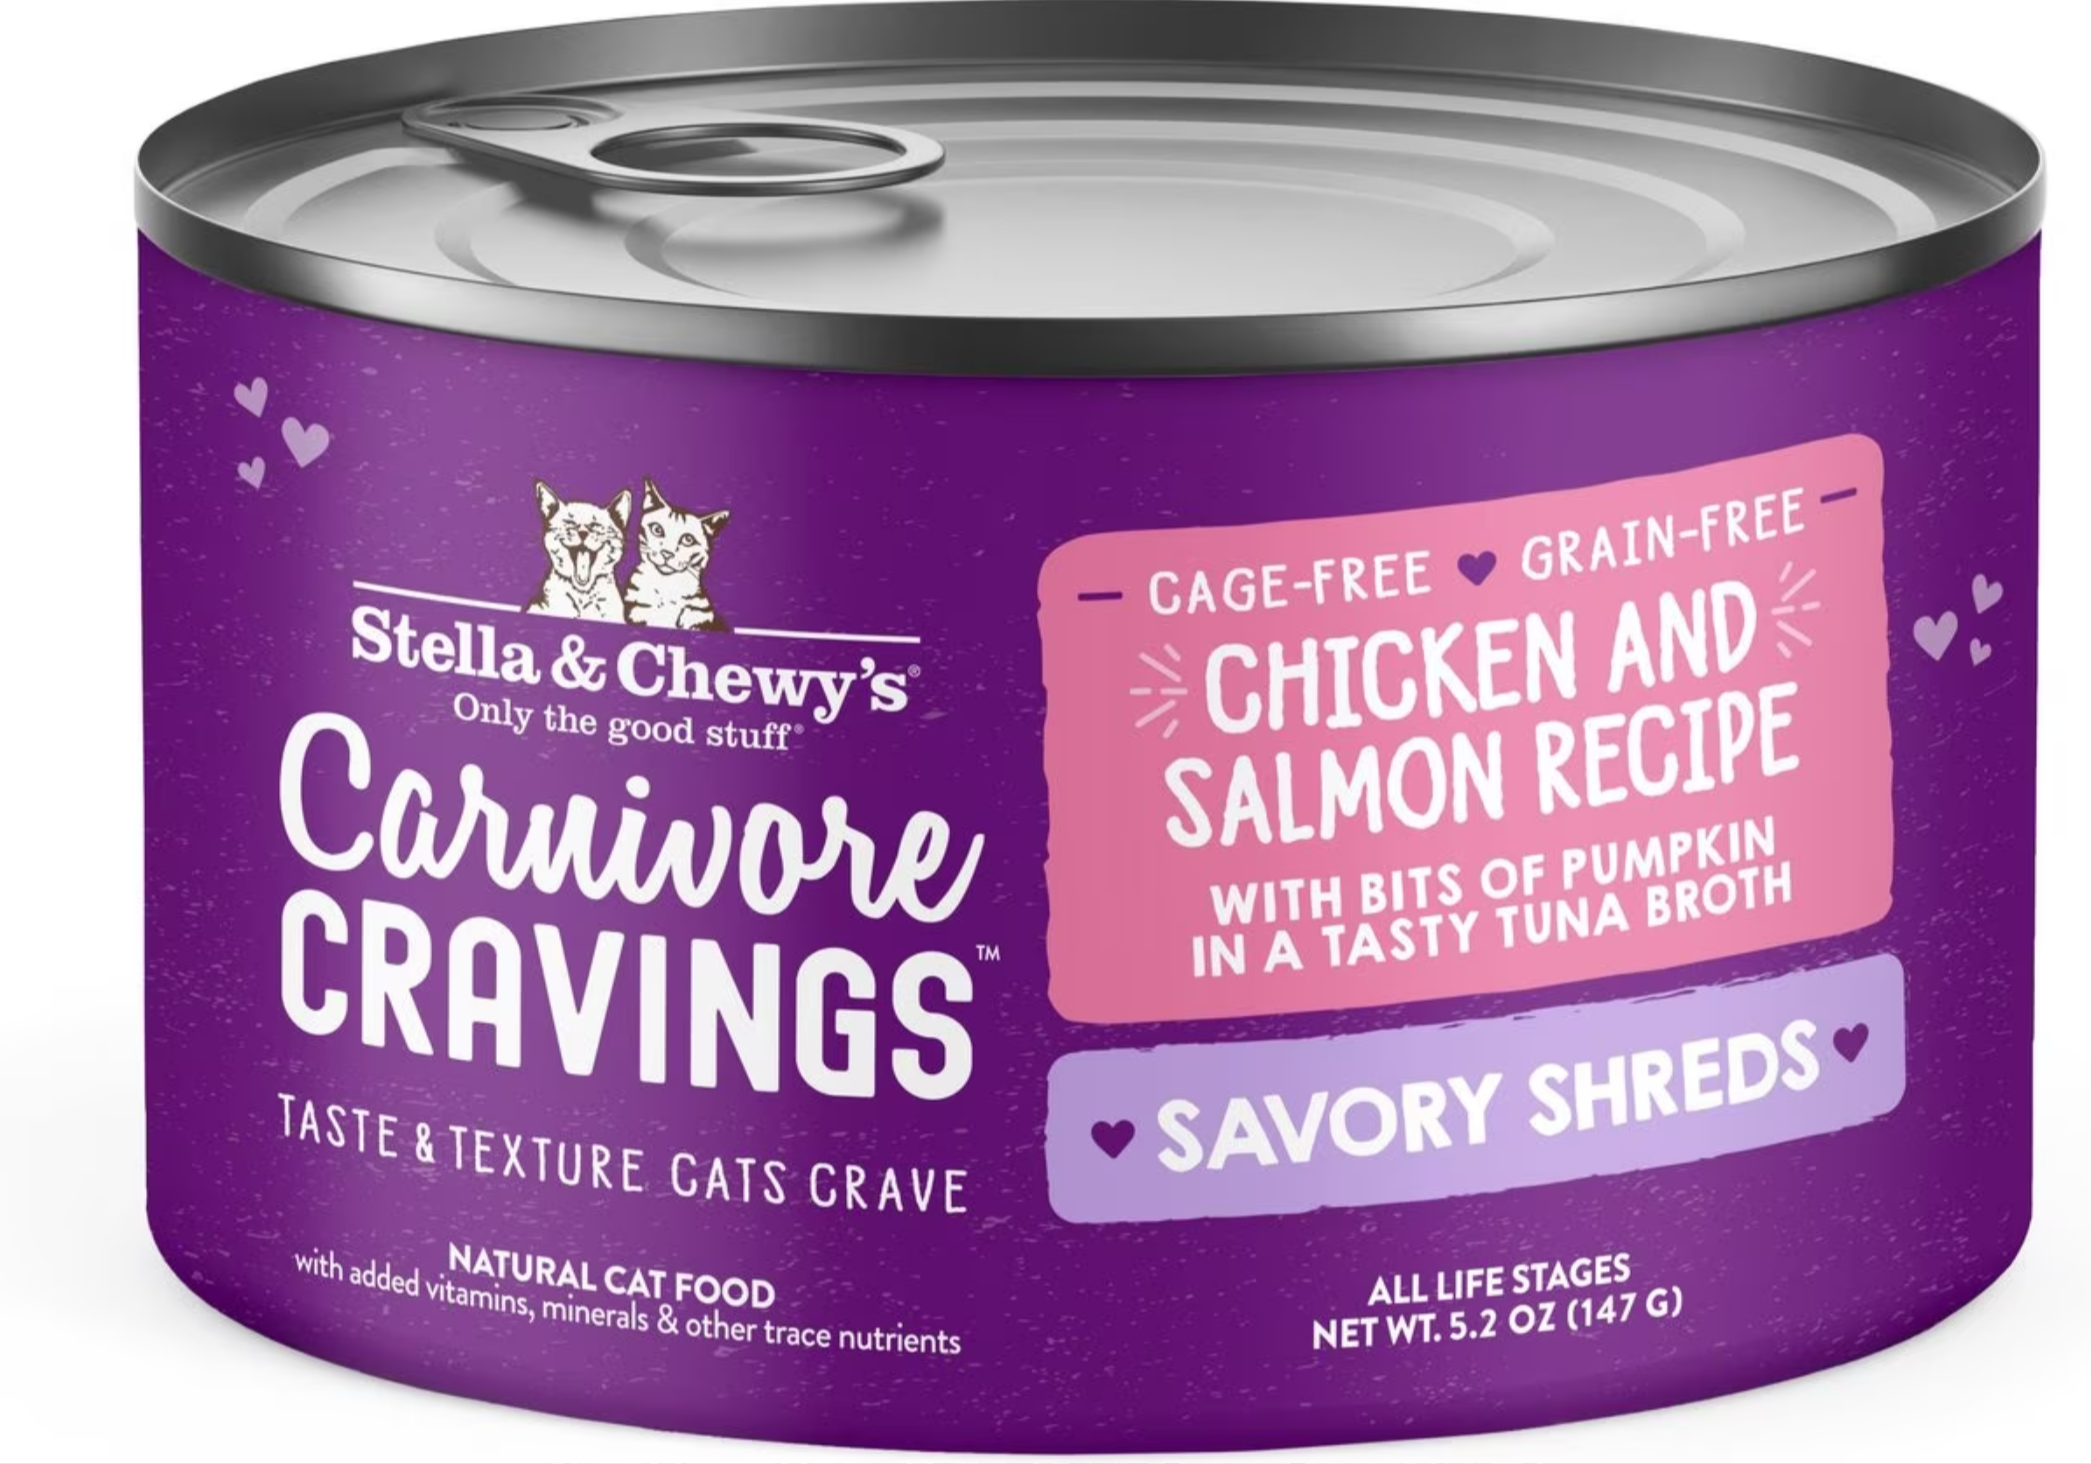 Stella & Chewy's Carnivore Cravings Savory Shreds Chicken & Salmon Recipe - 5.2oz Can